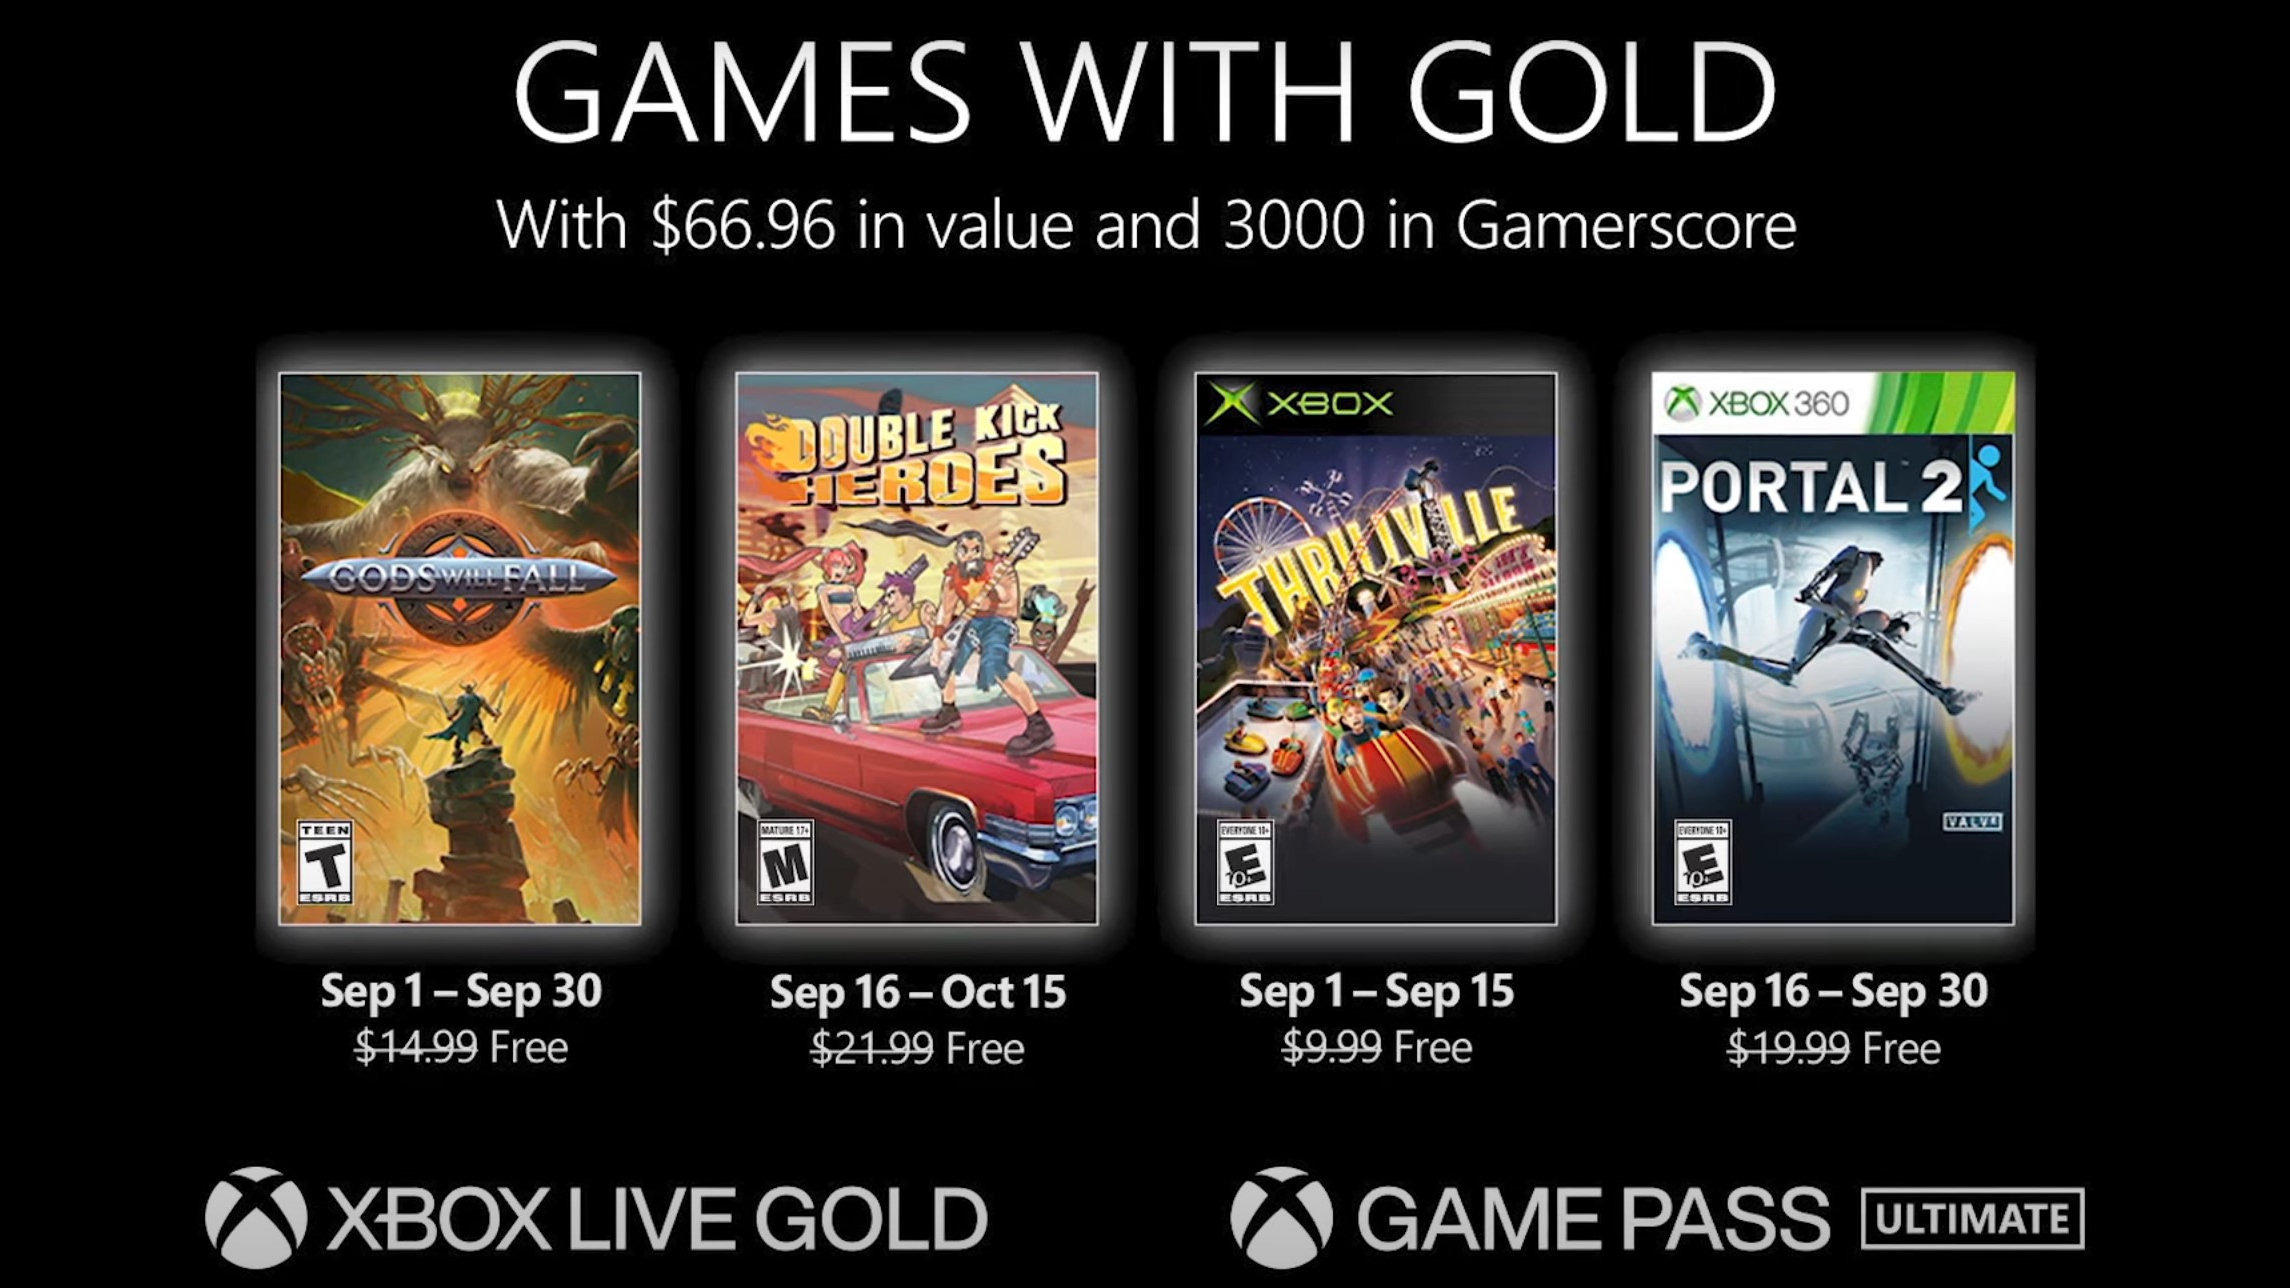 Xbox Introduces Game Pass Core - Set to Replace Games with Gold in  September